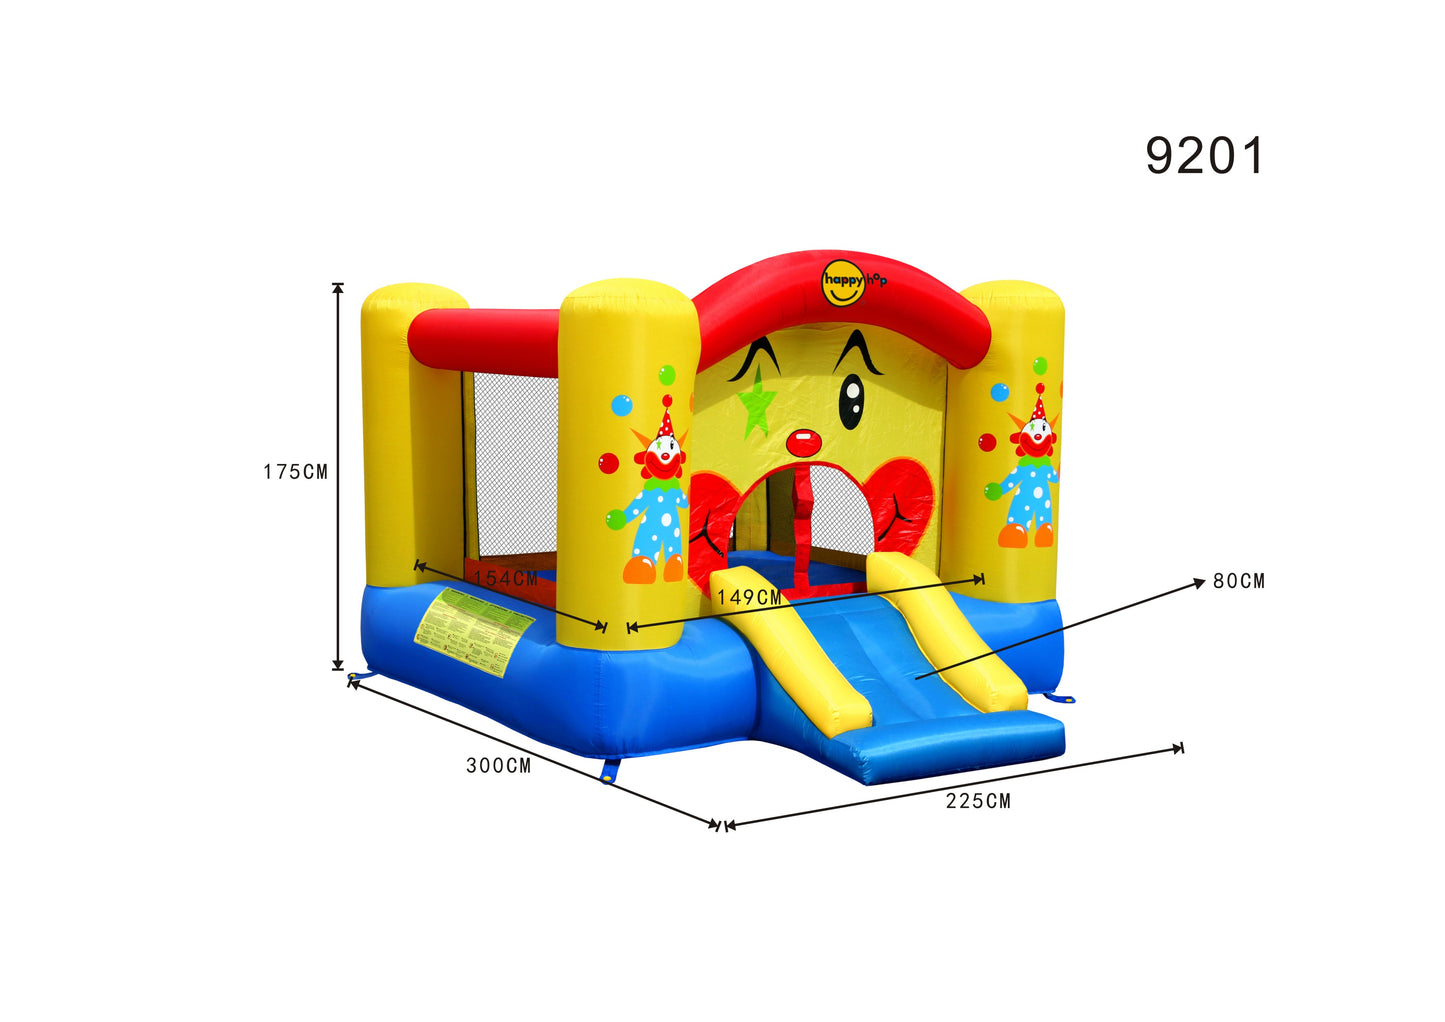 Clown Bouncer with Slide